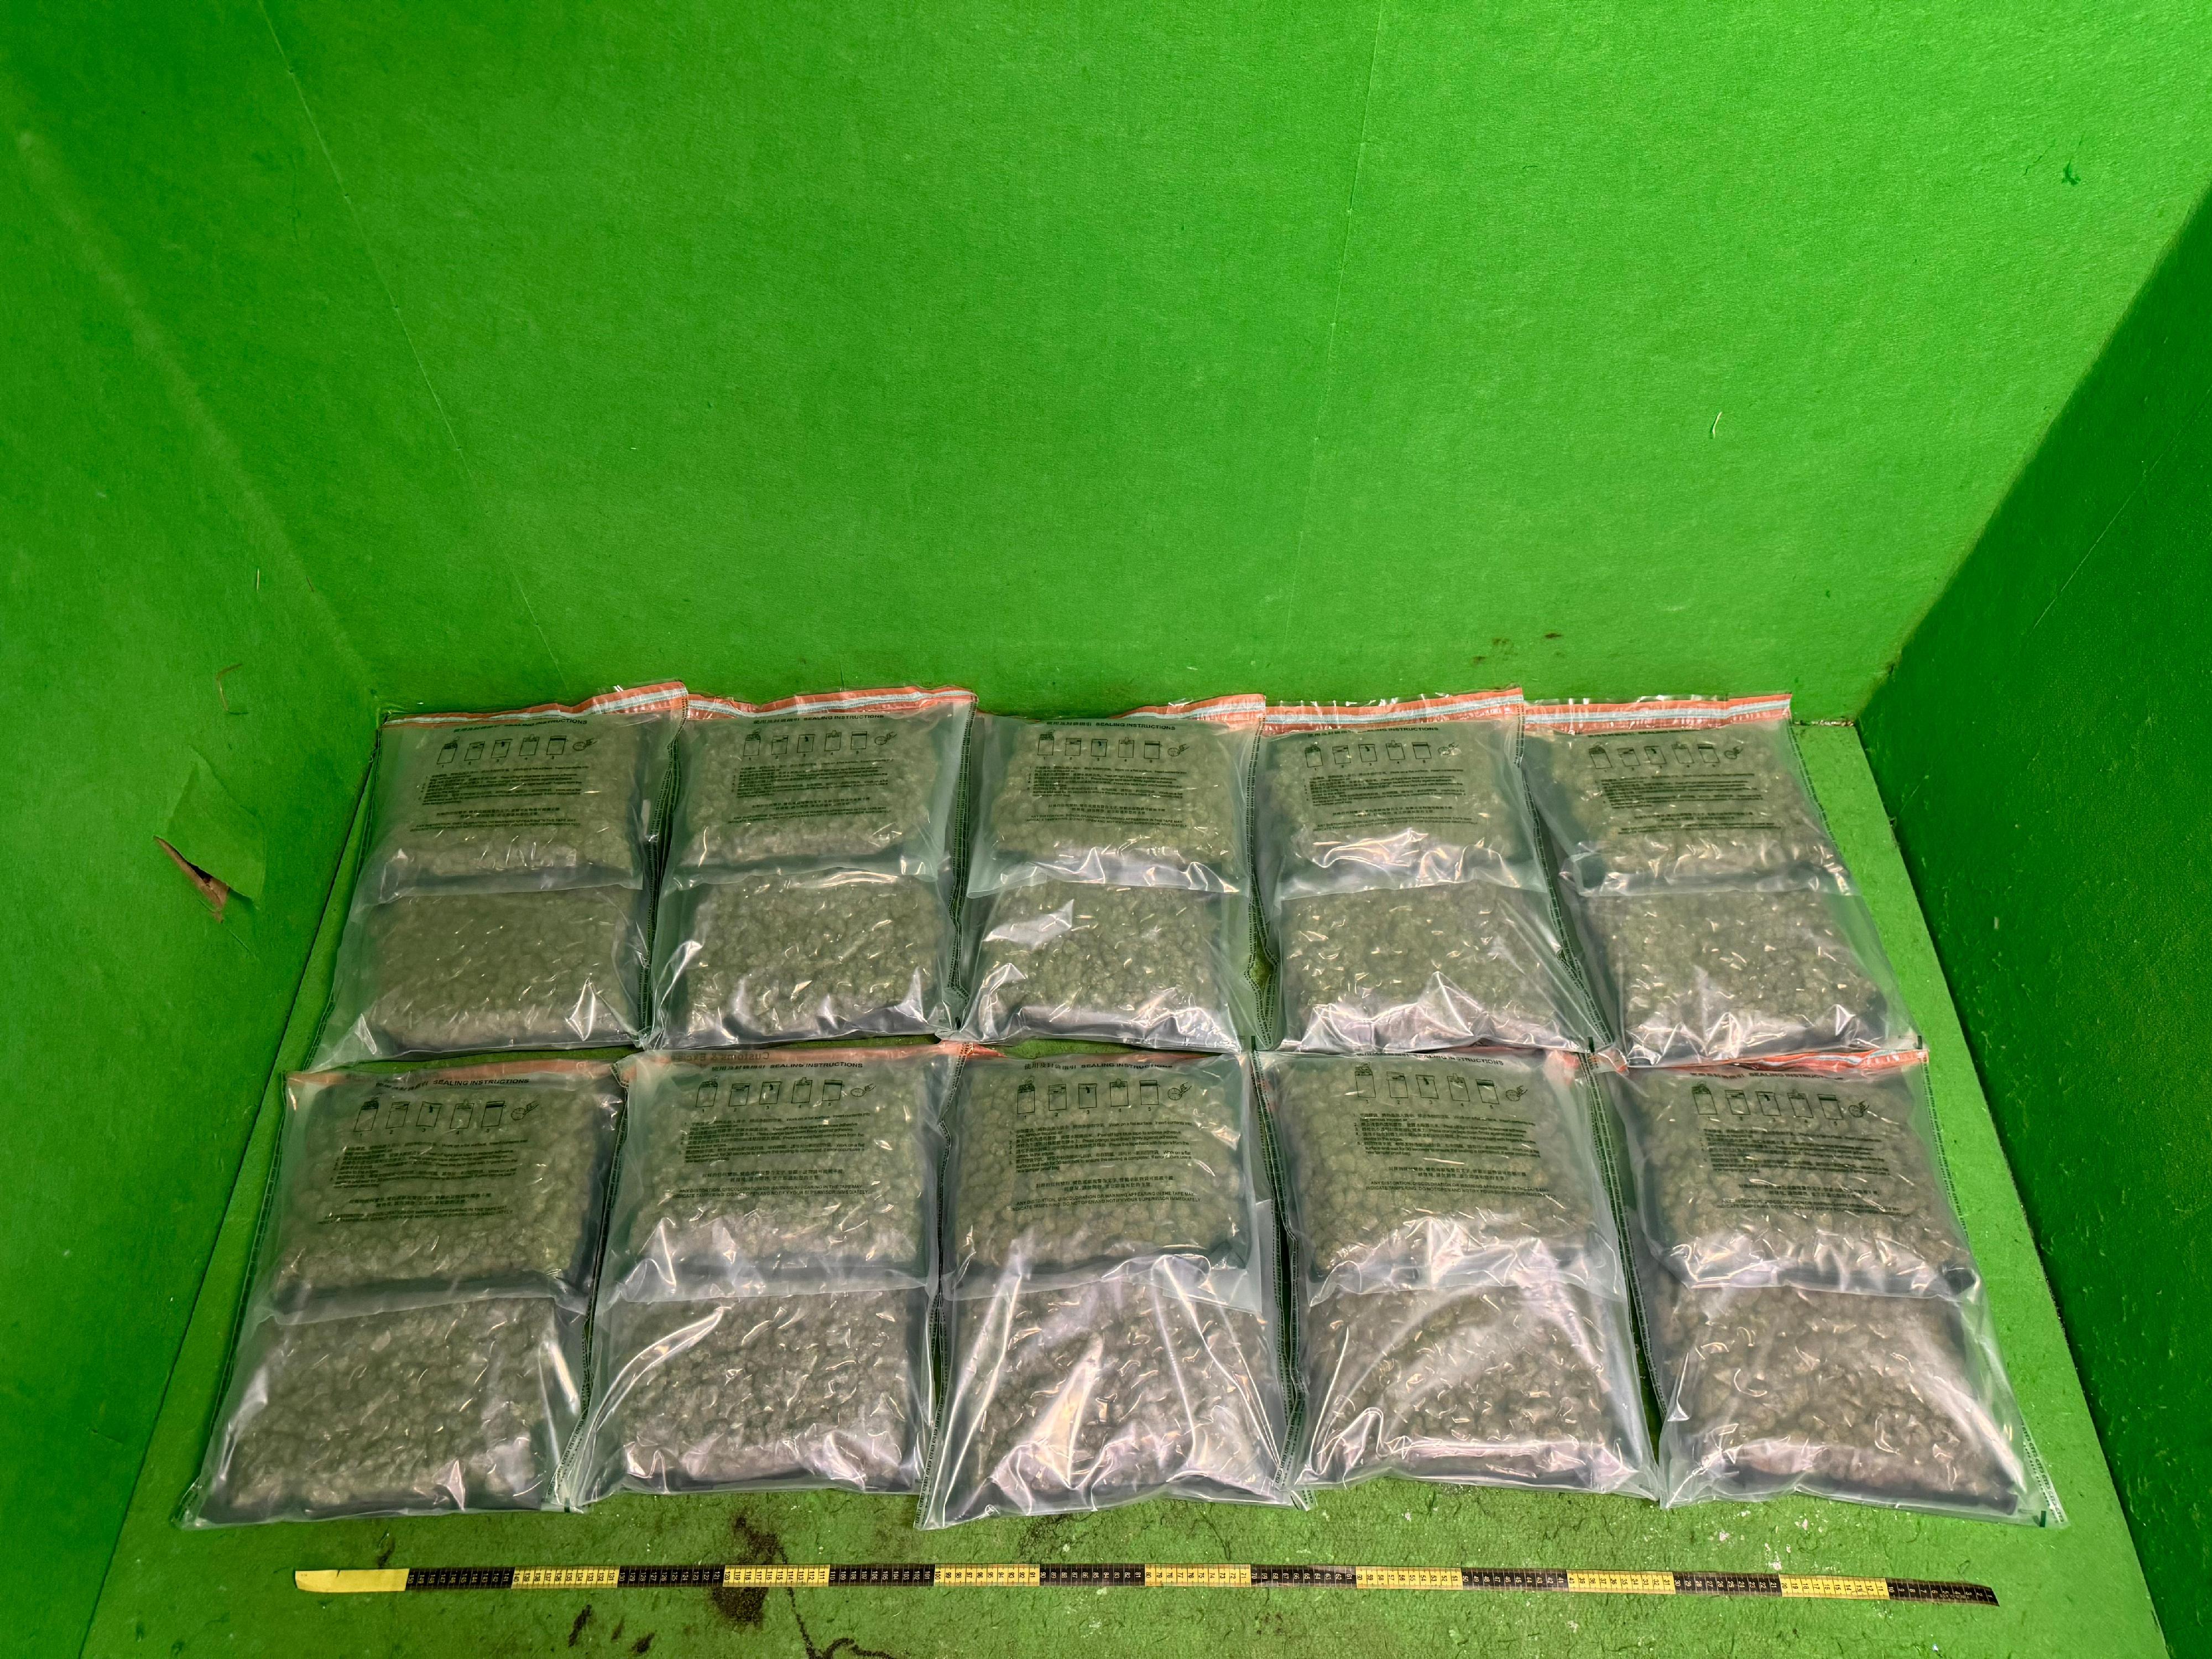 Hong Kong Customs yesterday (May 31) detected a drug trafficking case involving baggage concealment at Hong Kong International Airport and seized about 10 kilograms of suspected cannabis buds with an estimated market value of about $2 million. Photo shows the suspected cannabis buds seized.